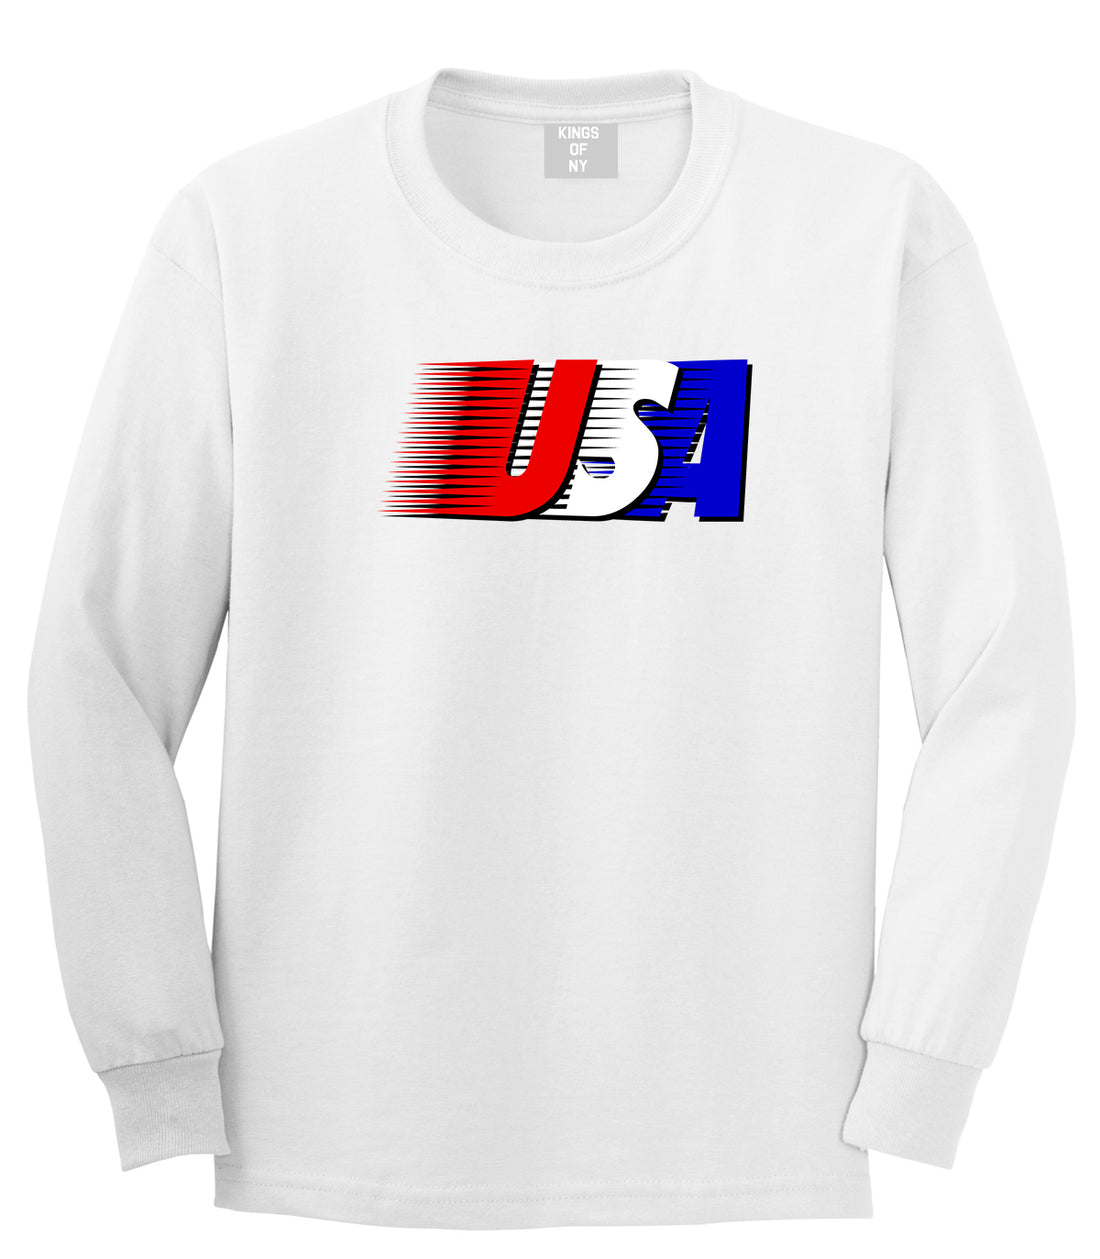 Fourth Of July USA Mens White Long Sleeve T-Shirt by KINGS OF NY